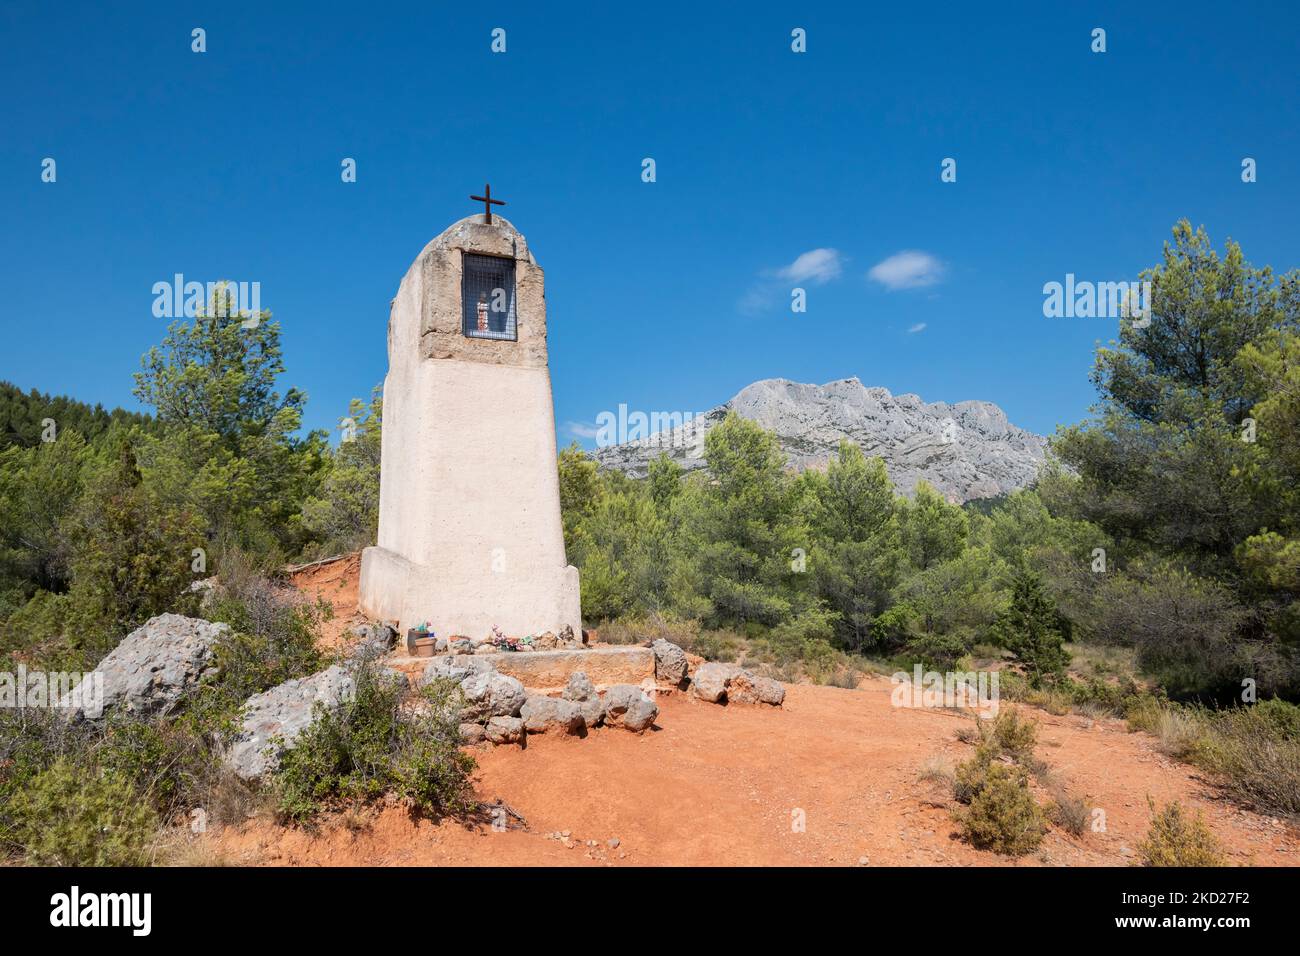 Oratory close to the famous and iconic Sainte Victoire Mountain, Bouches du Rhone, Provence, France, Europe Stock Photo